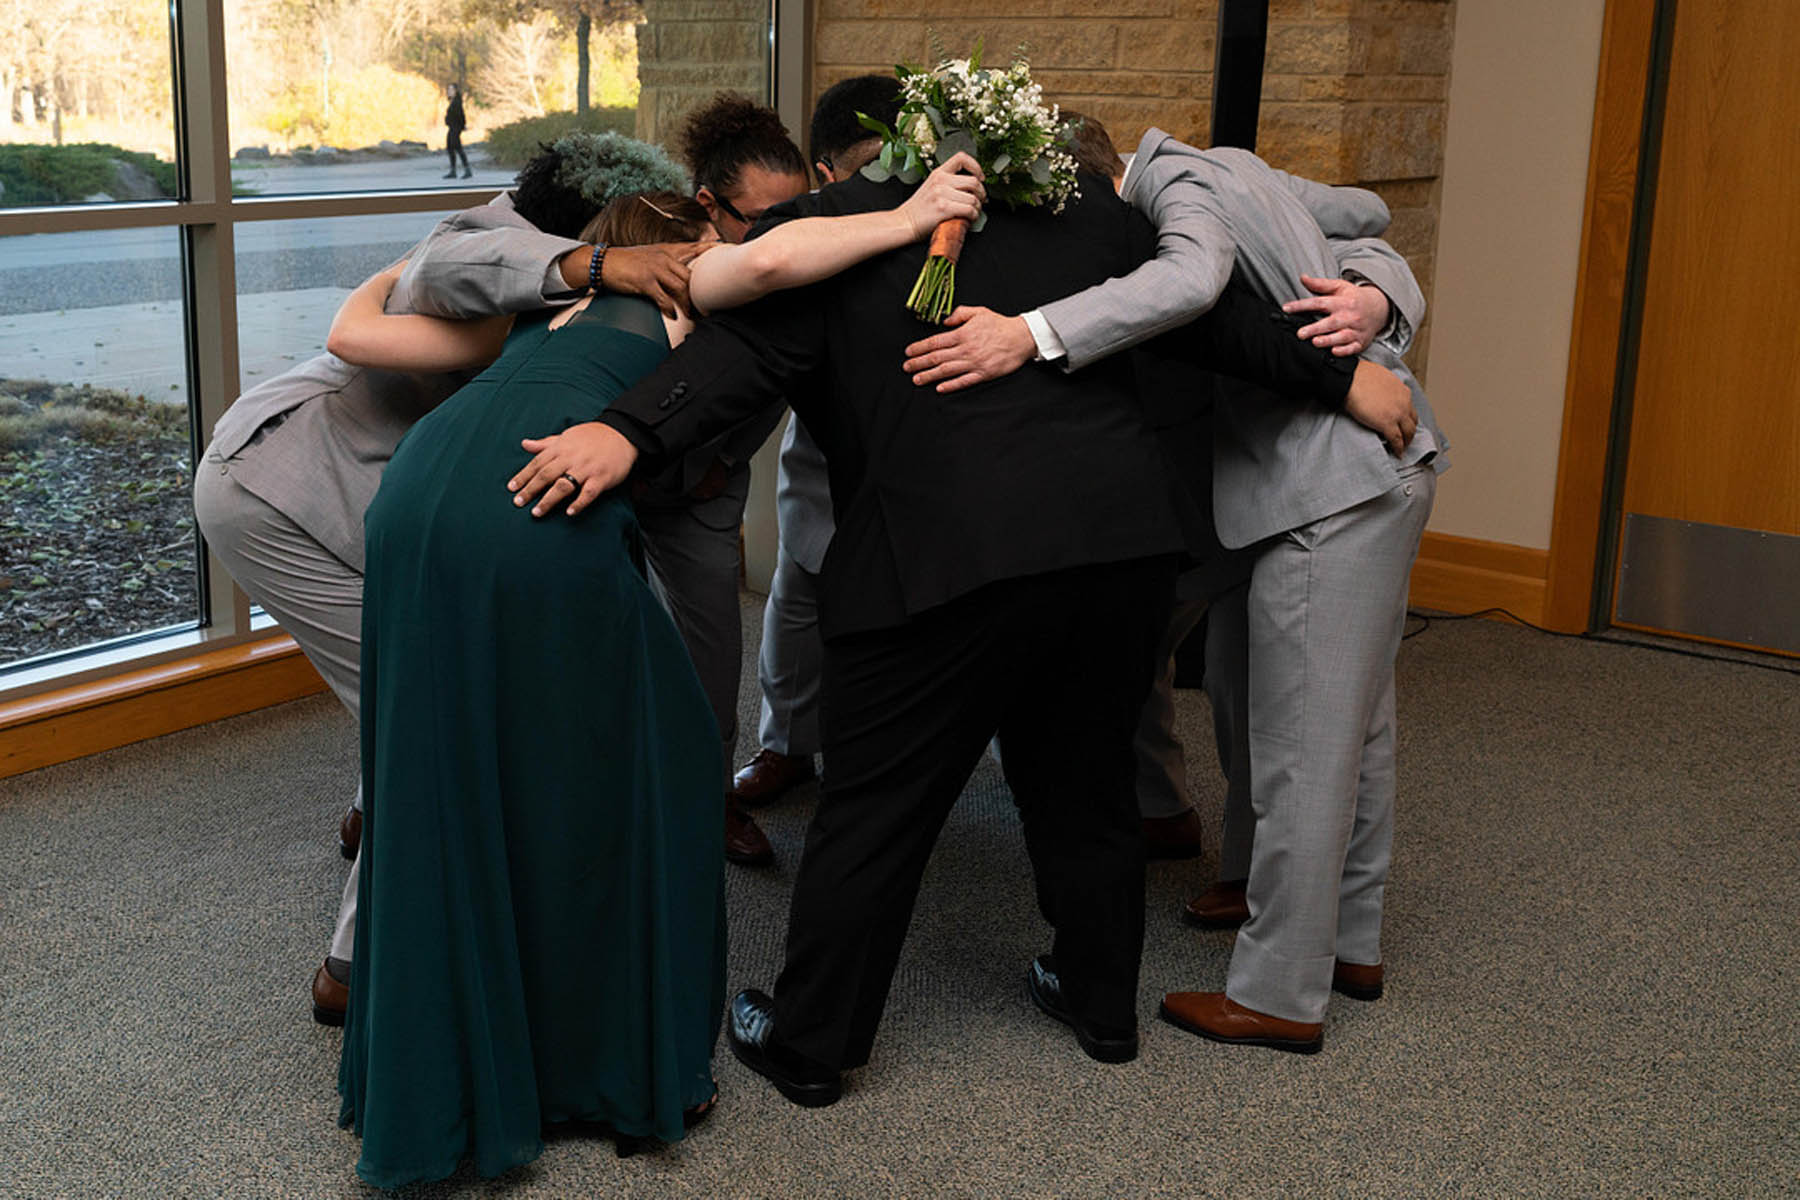 A group of people in black, green and gray huddle on the side of a wedding ceremony, like a rugby team.